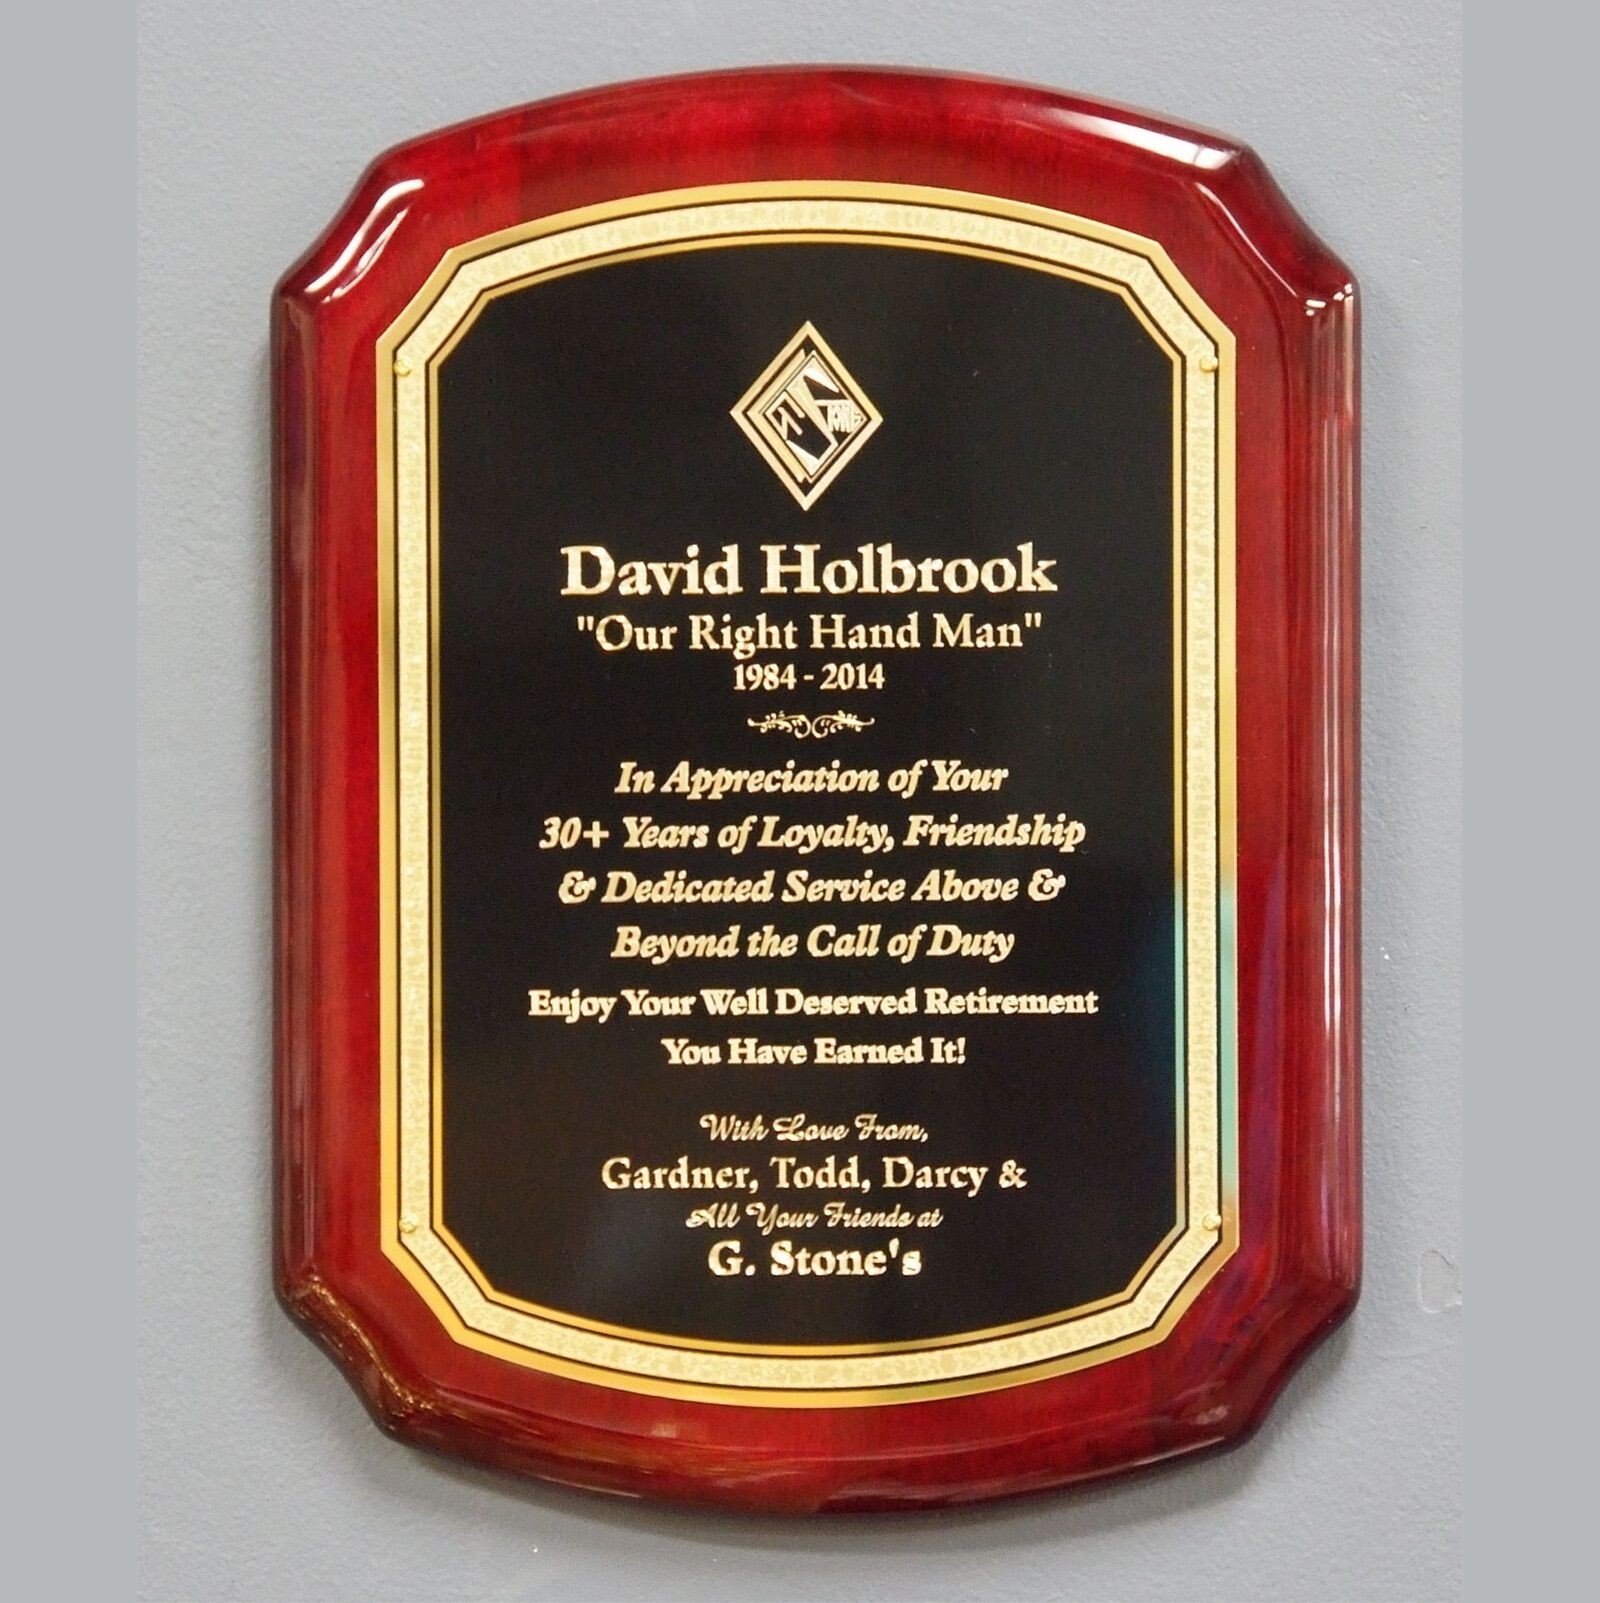 rosewood arched plaque with scalloped corners 8 x 10.5 piano finish with standard engraving